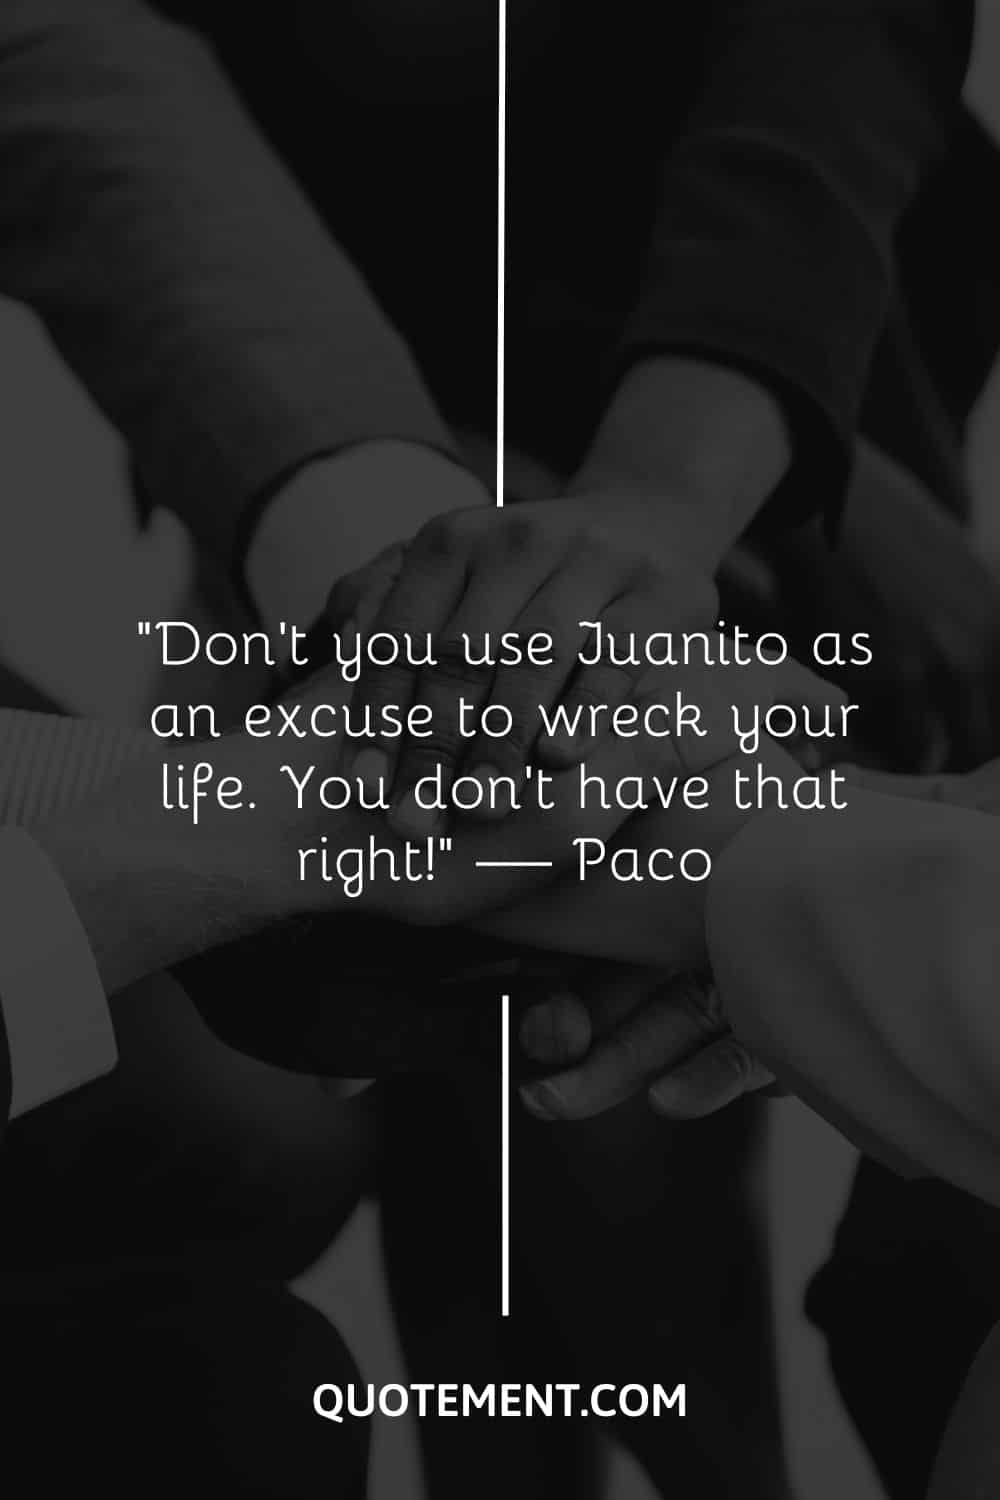 Don’t you use Juanito as an excuse to wreck your life. You don’t have that right